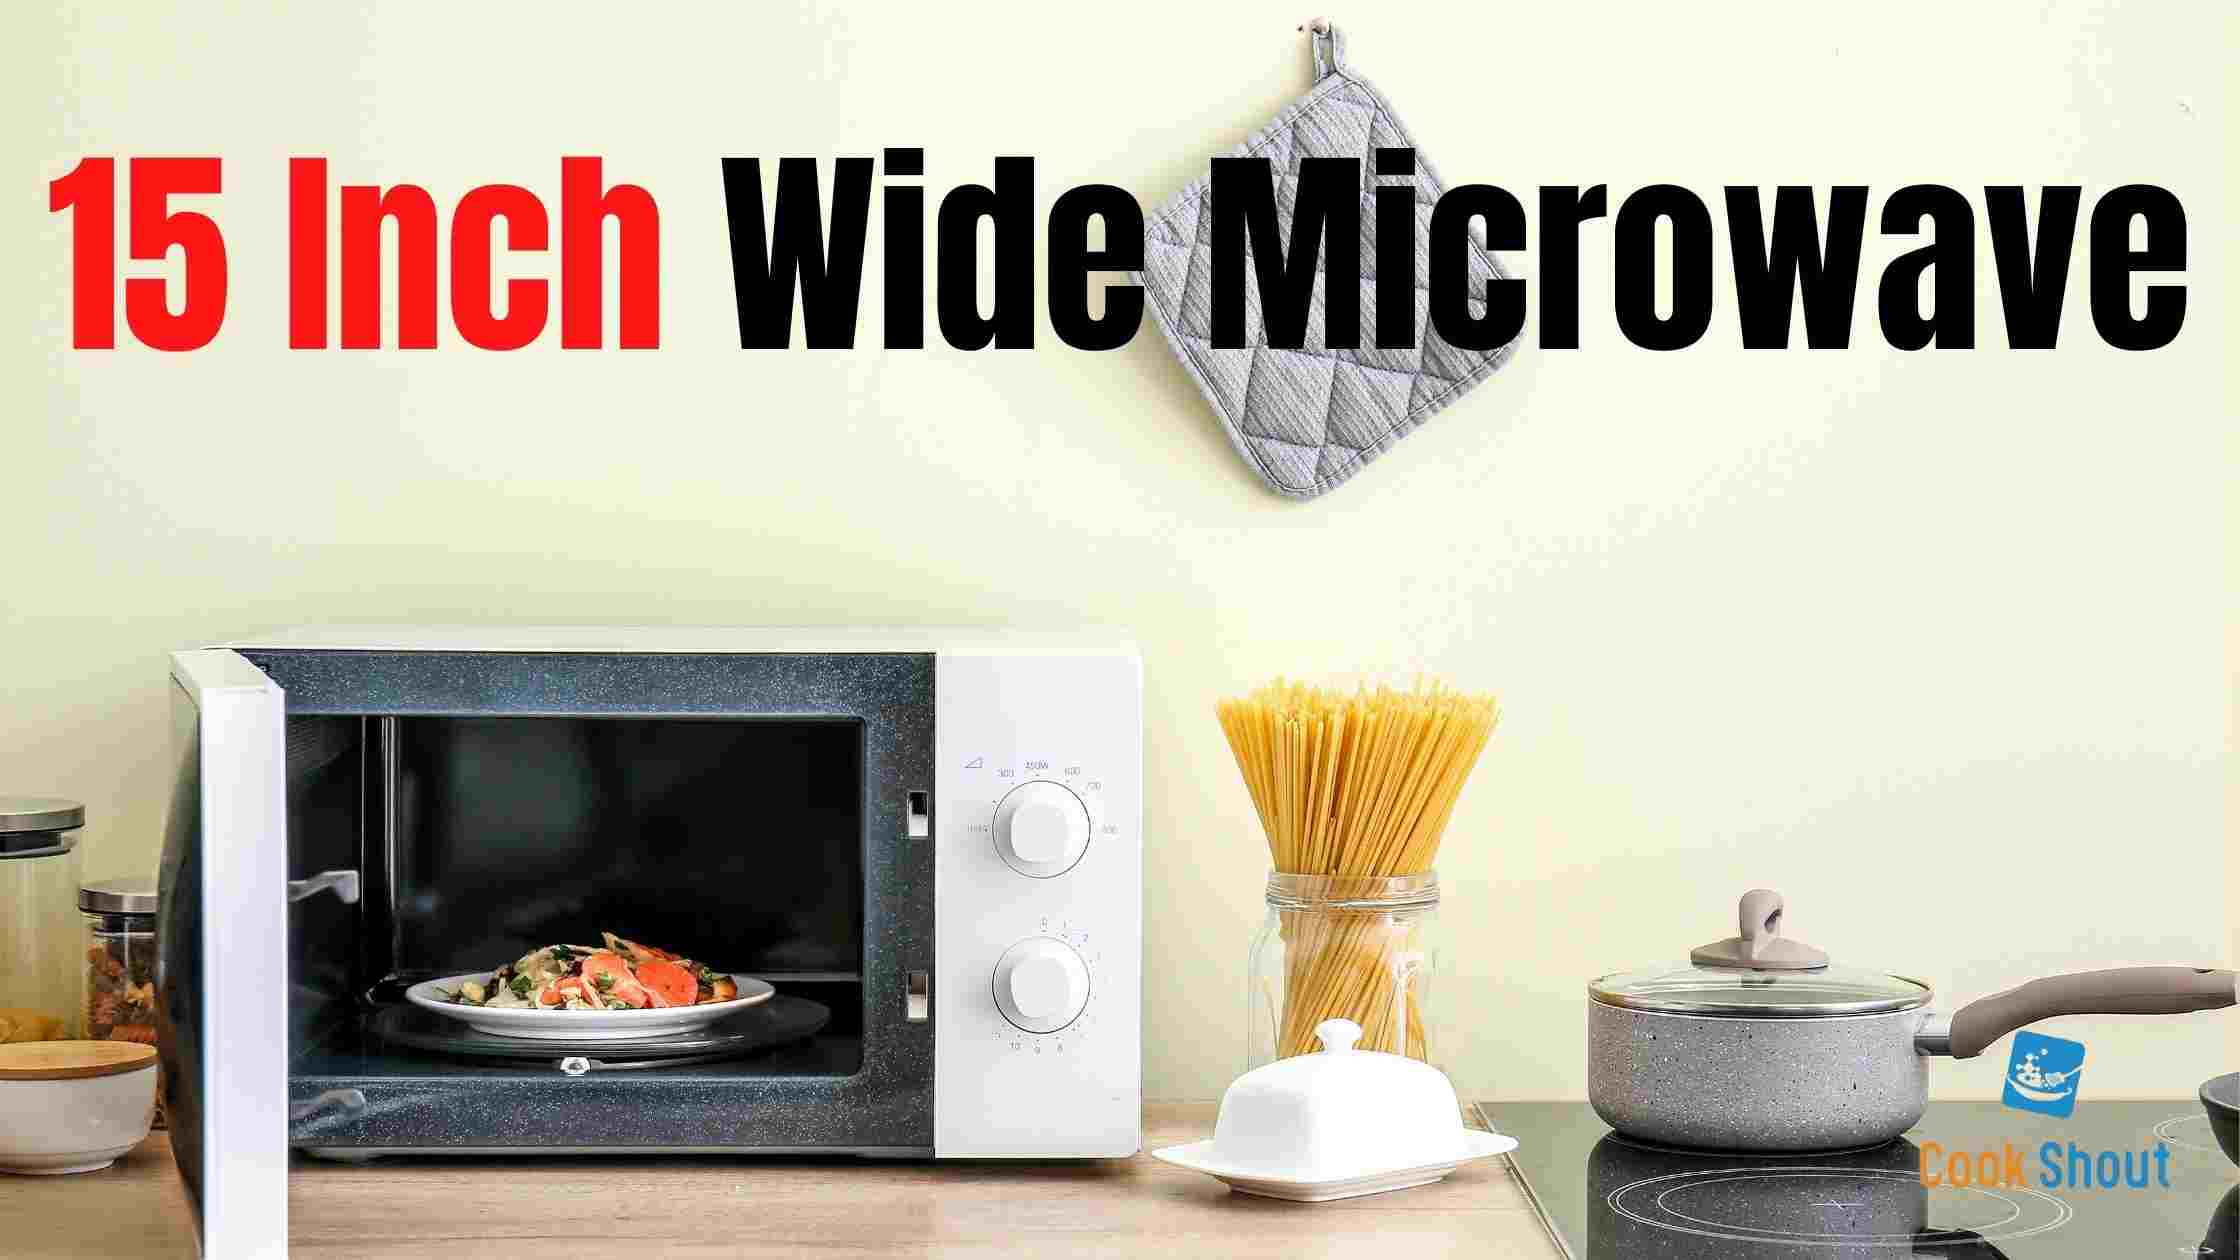 15 Inch Wide Microwave